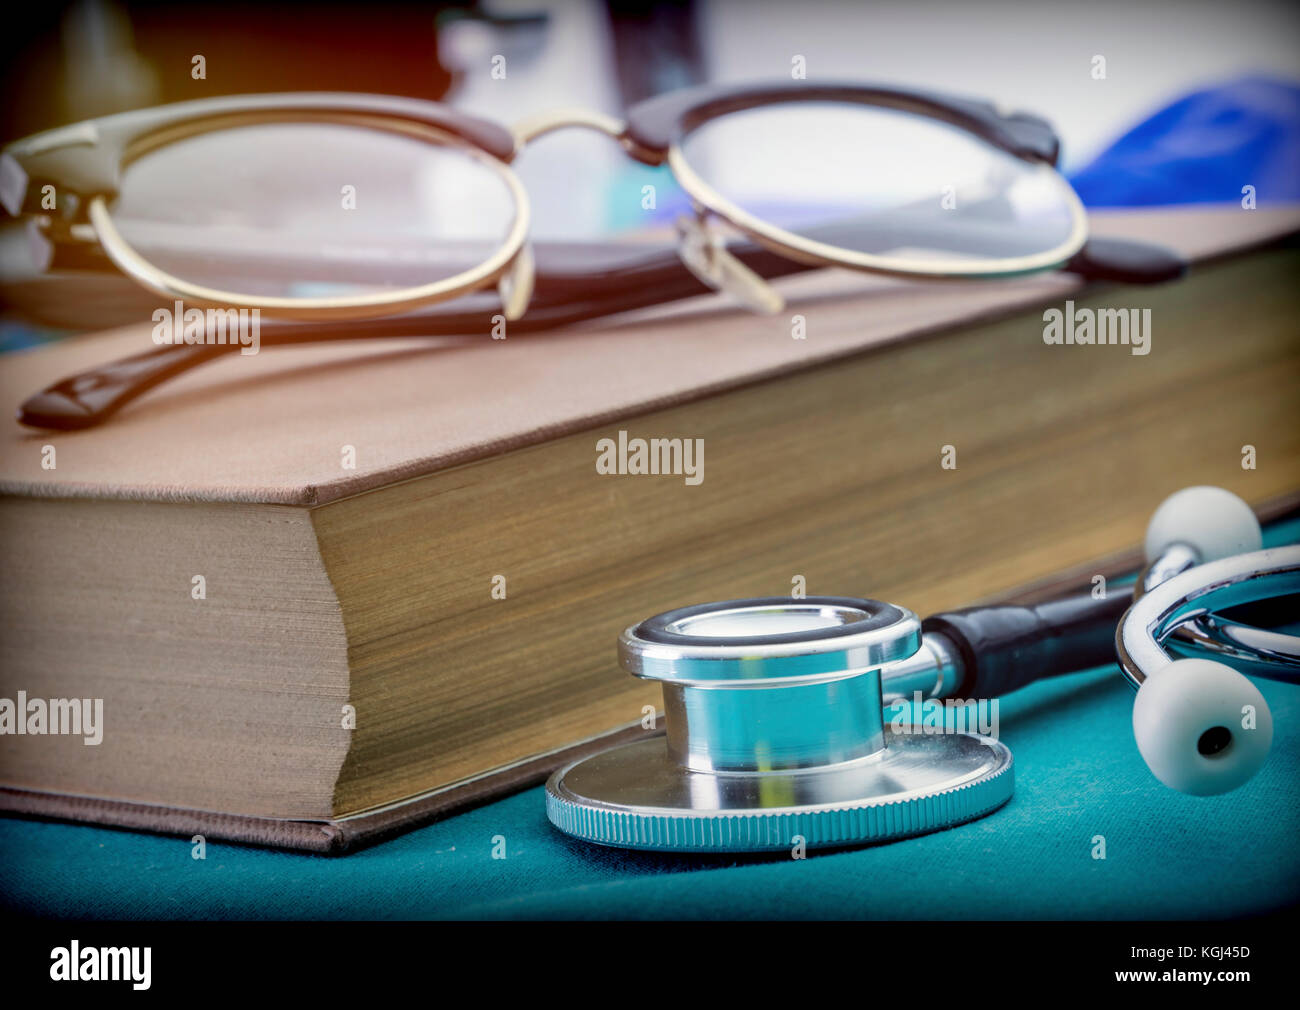 Medicine books next to a stethoscope and glasses, conceptual image Stock Photo